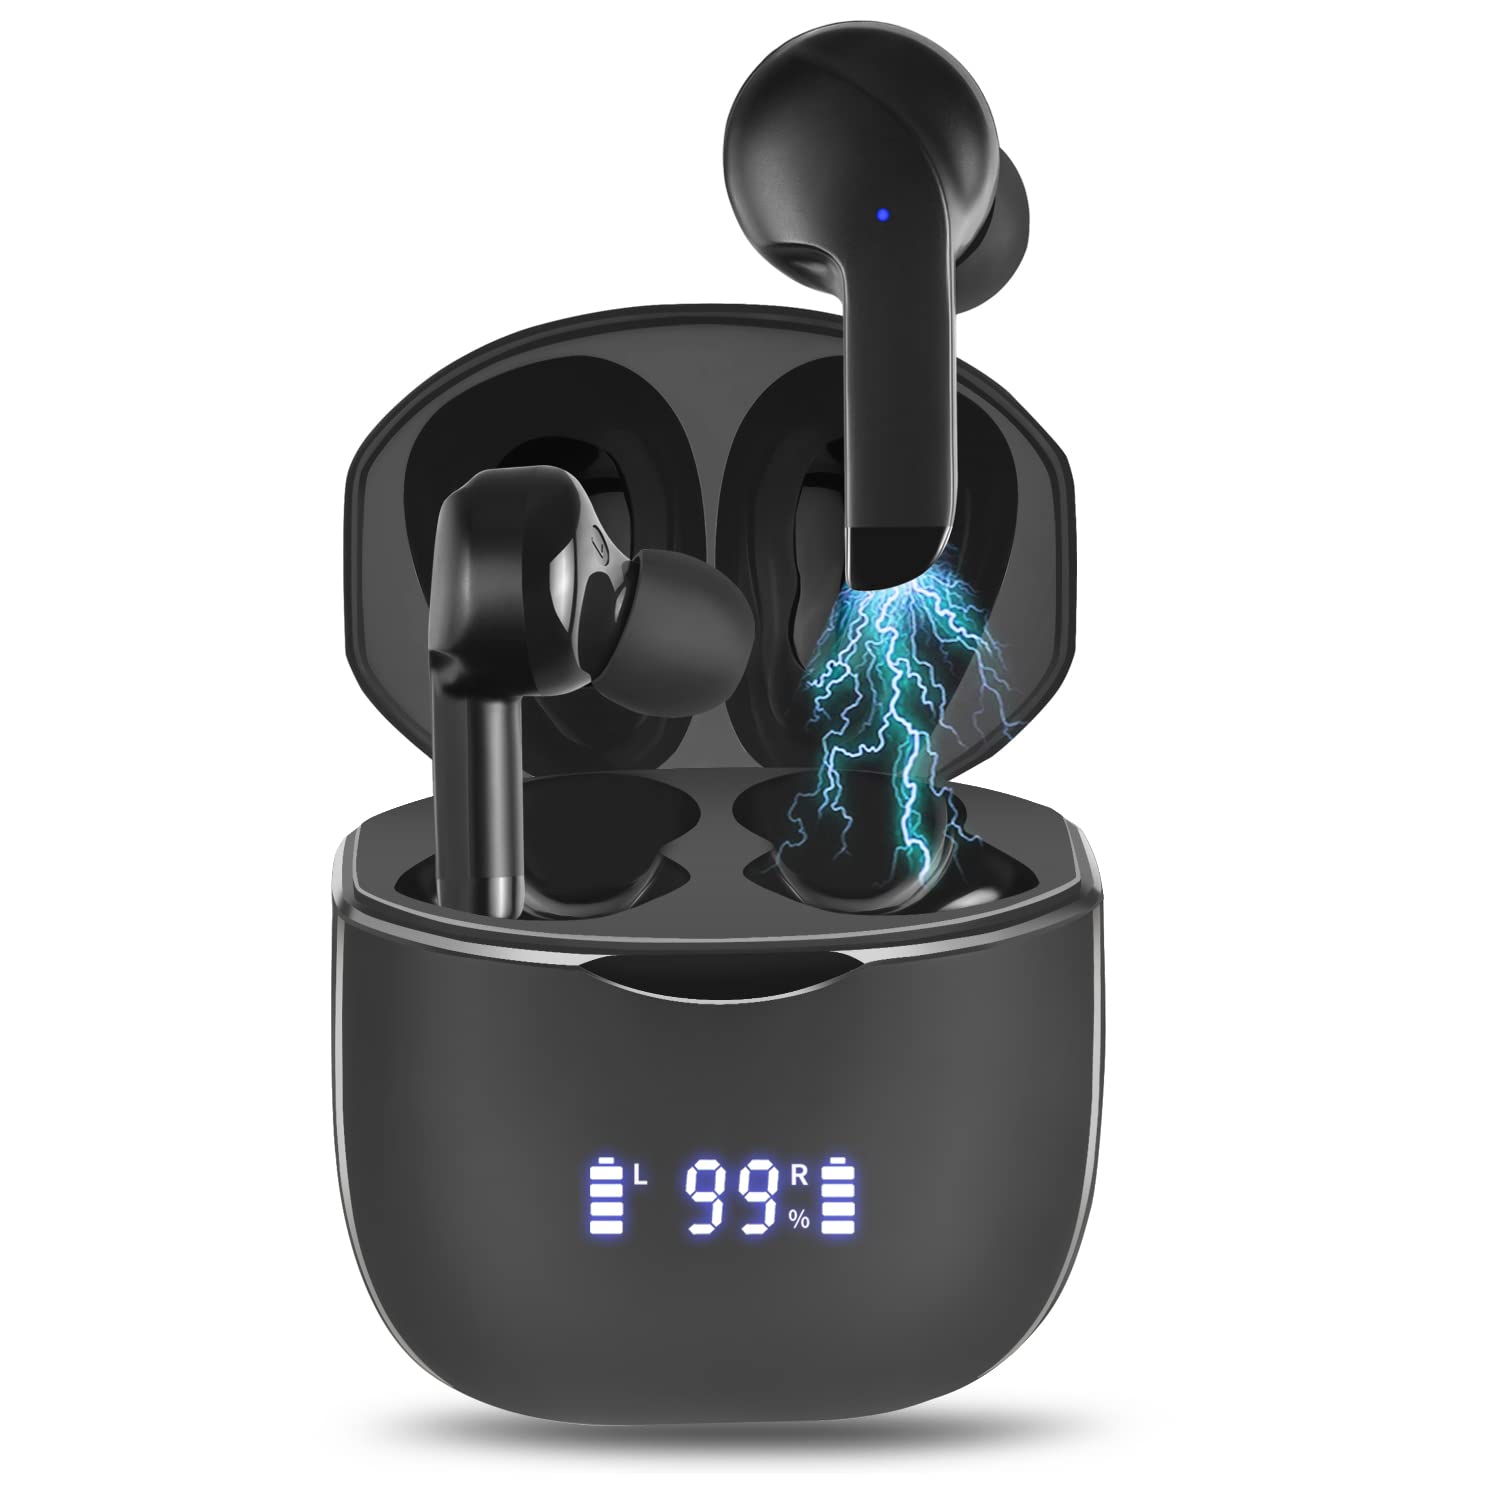 Connecting Wireless Earbuds To Your Android Device